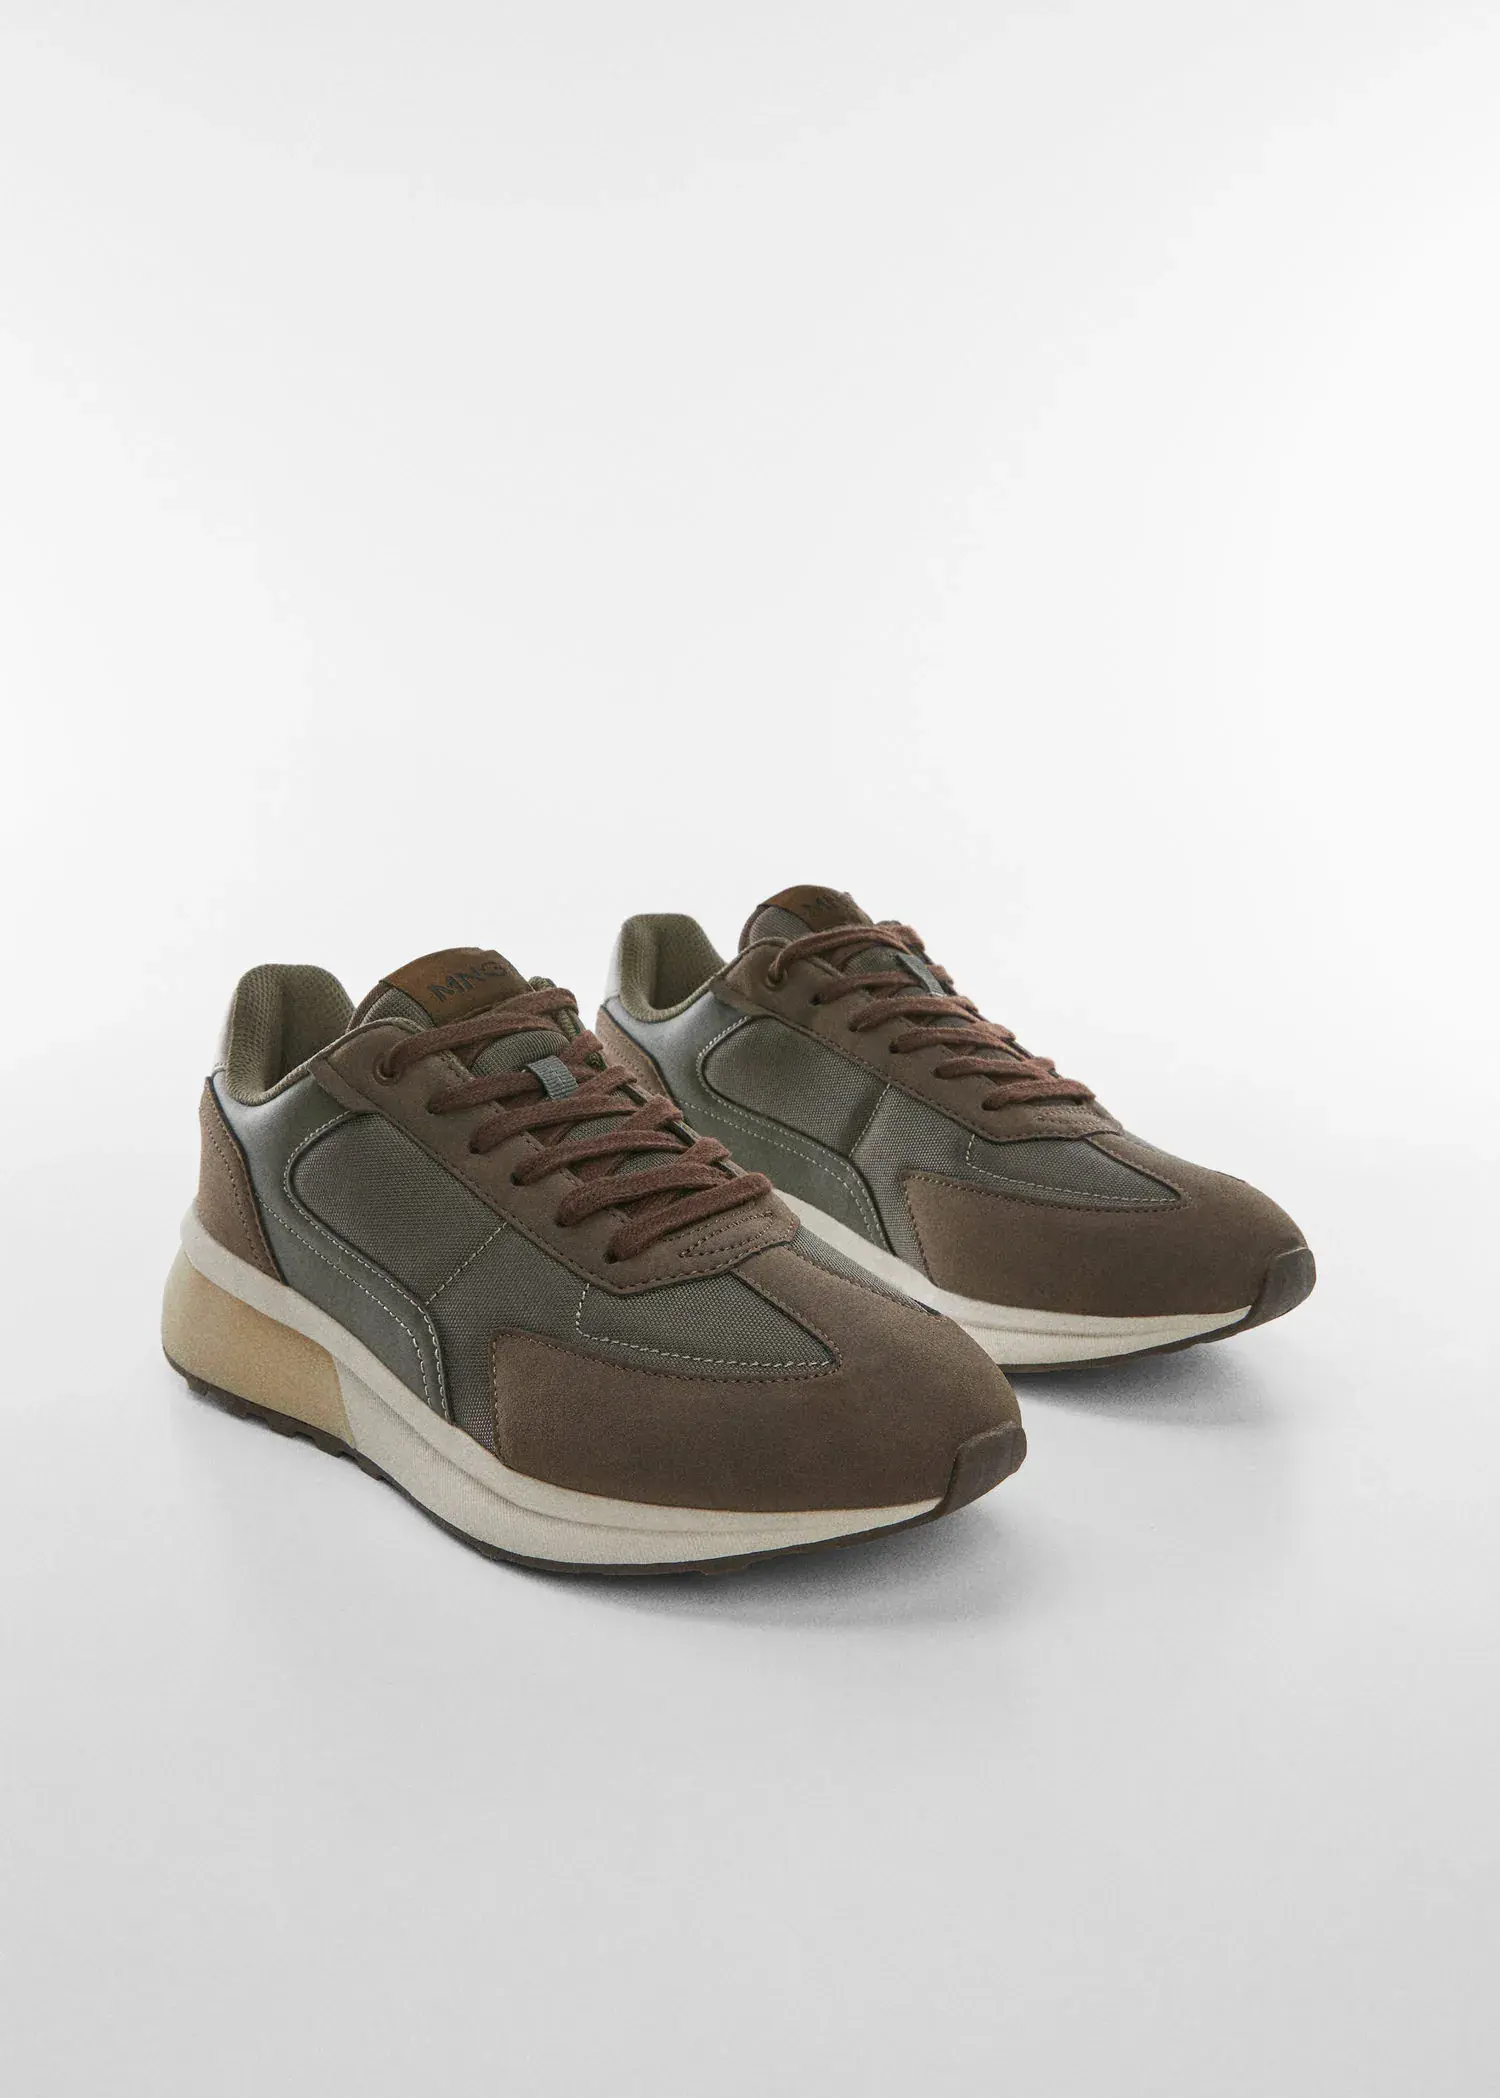 Mango Leather mixed sneakers. a pair of shoes that are sitting on the ground. 